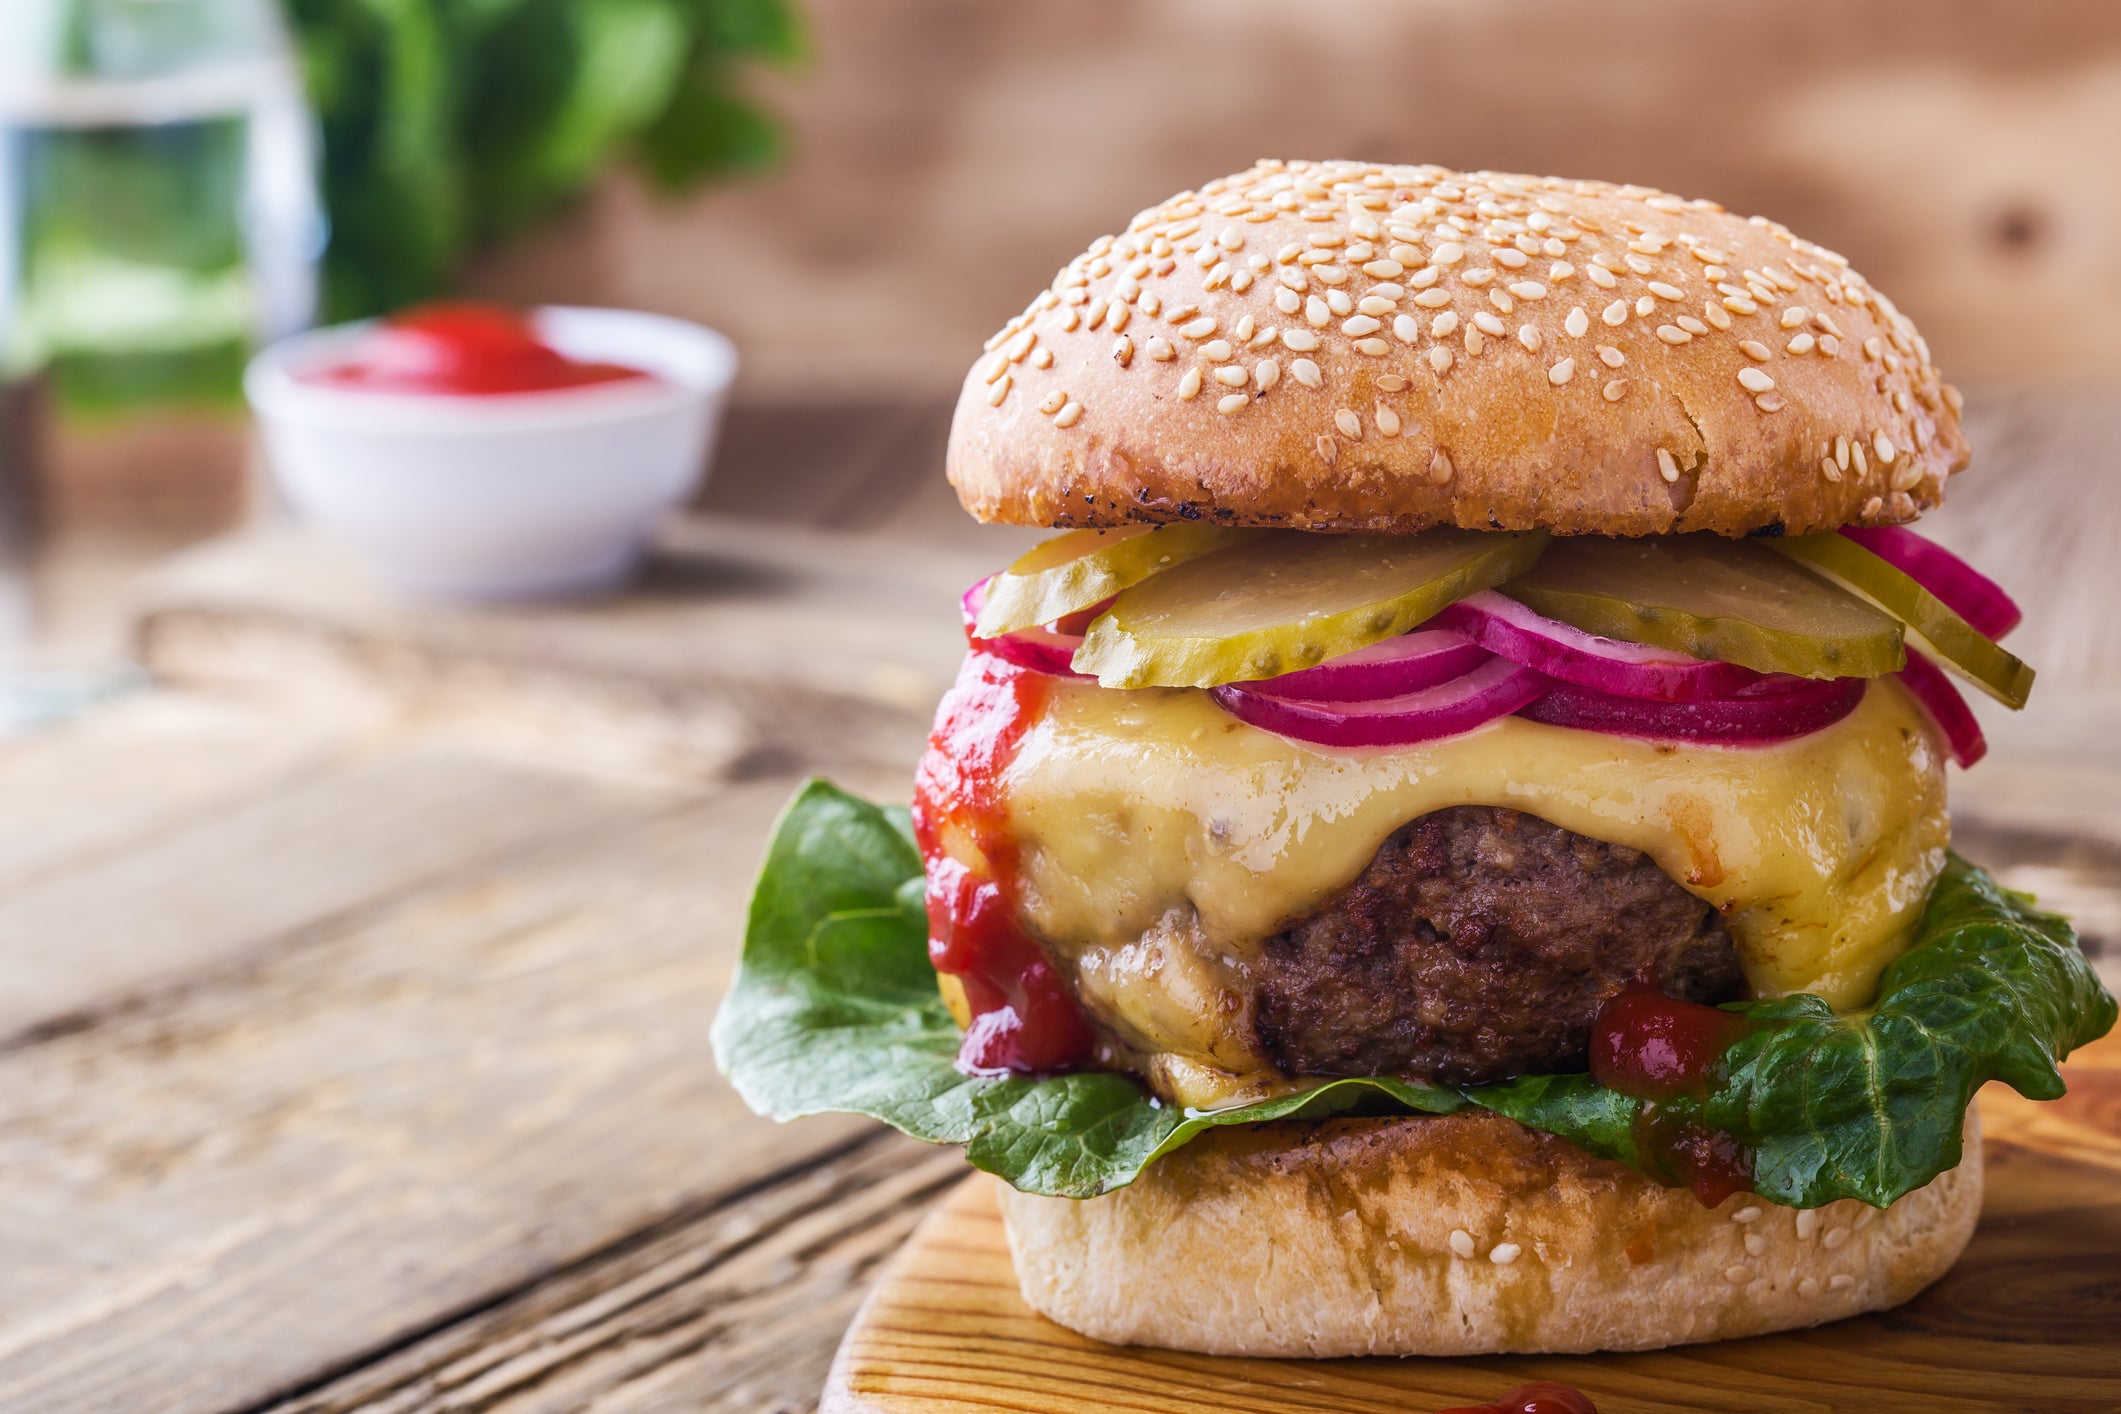 ‘These cheeseburgers bring all the savoury-sweet flavours of grilled Korean barbecue’